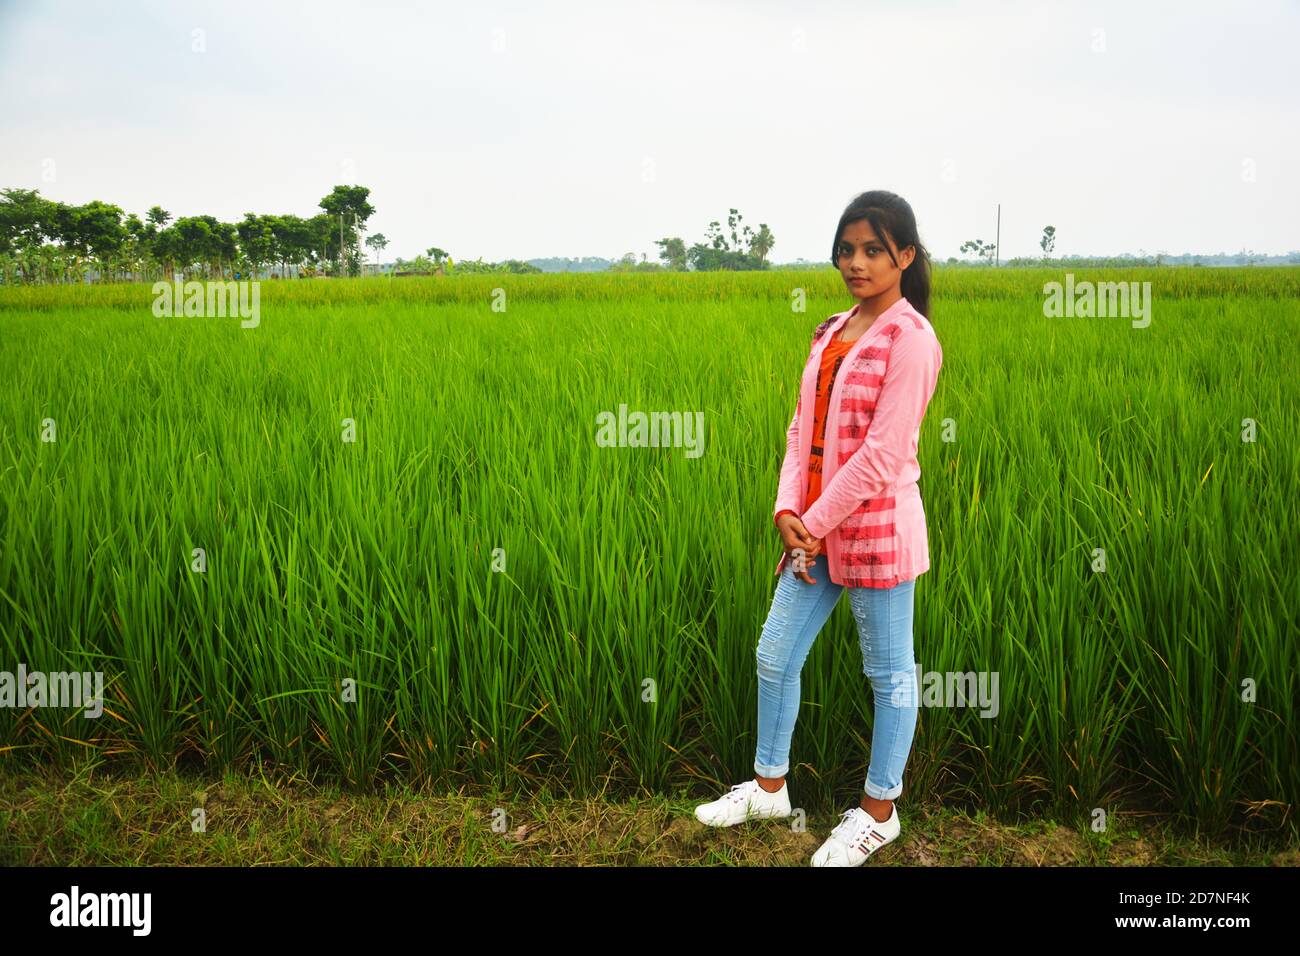 A teenage girl wearing jeans, pink uppers and white shoes standing in a paddy field, selective focusing Stock Photo